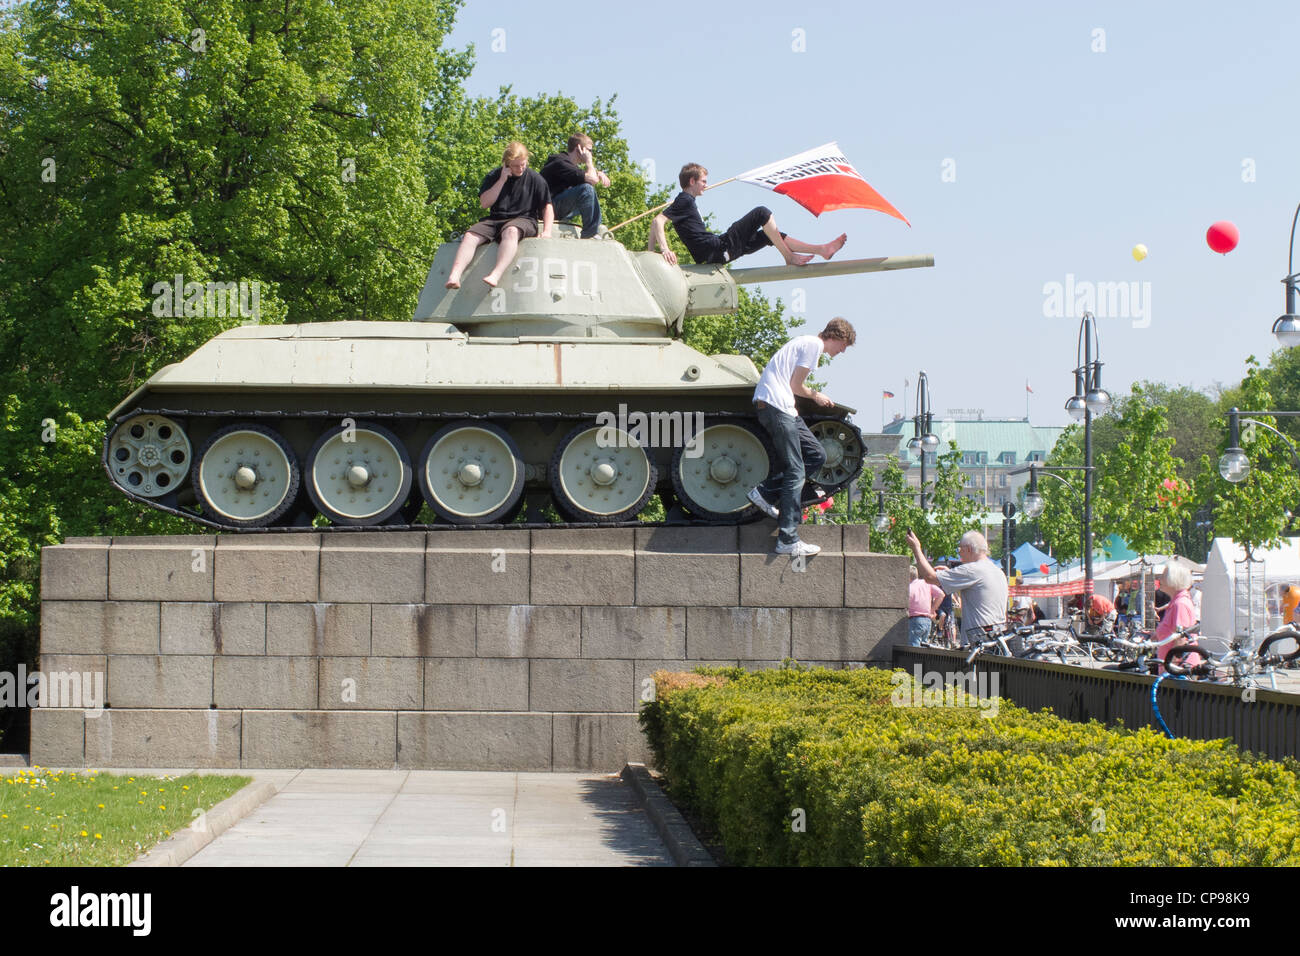 Berlin - The Russian War Memorial and tank. 17 Juni Strasse - May day celebrations Stock Photo